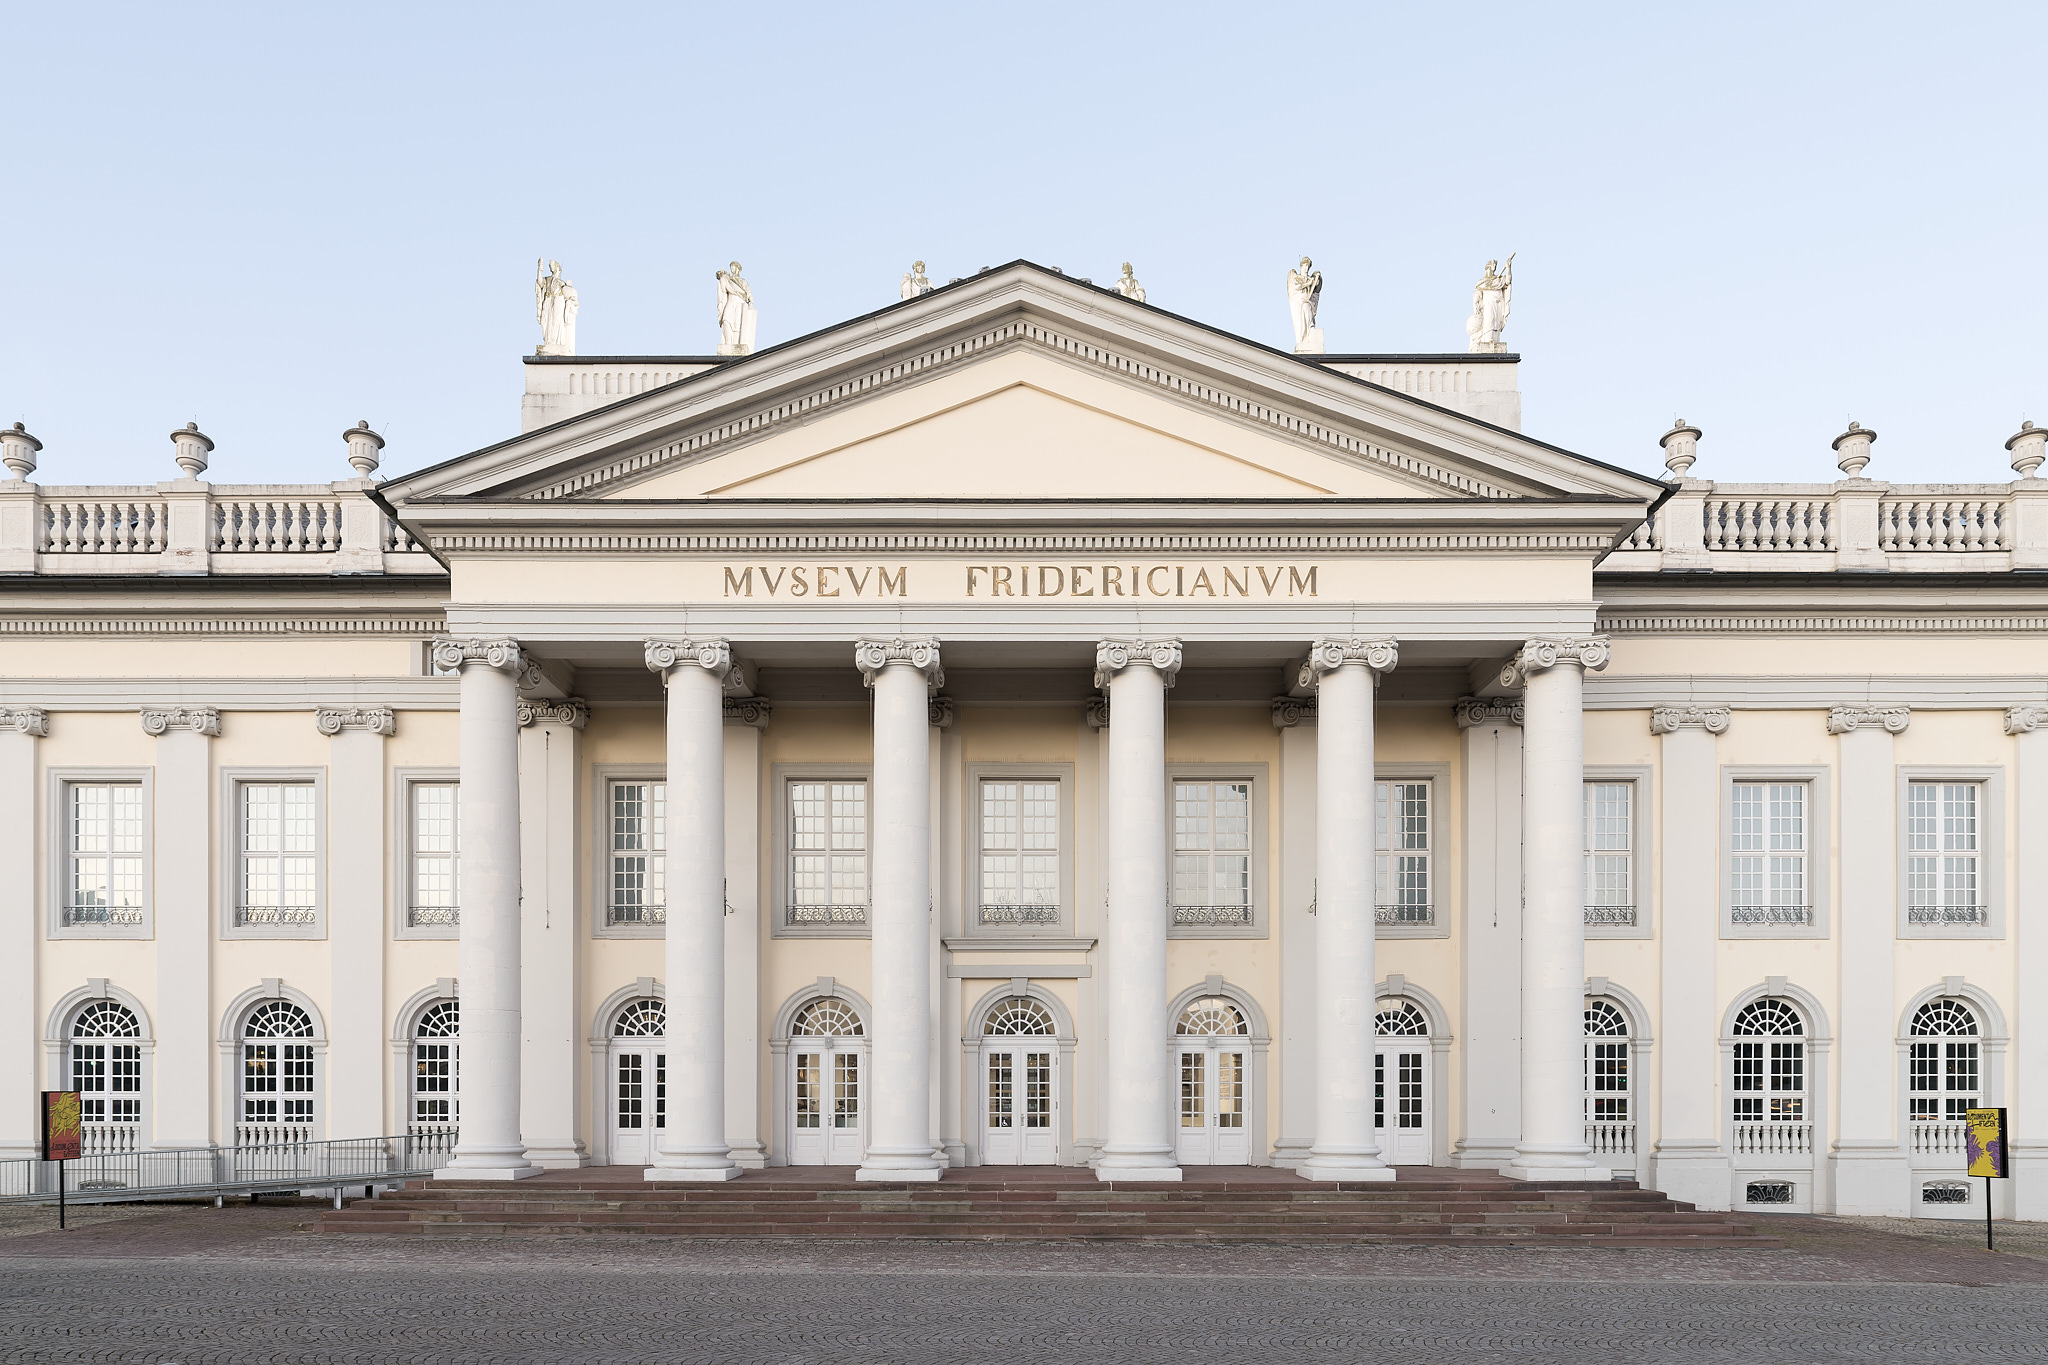 The photo shows the white neoclassical facade of the Fridericianum, with blue sky behind it. The front of the building is characterized by a portico supported by six Ionic columns.